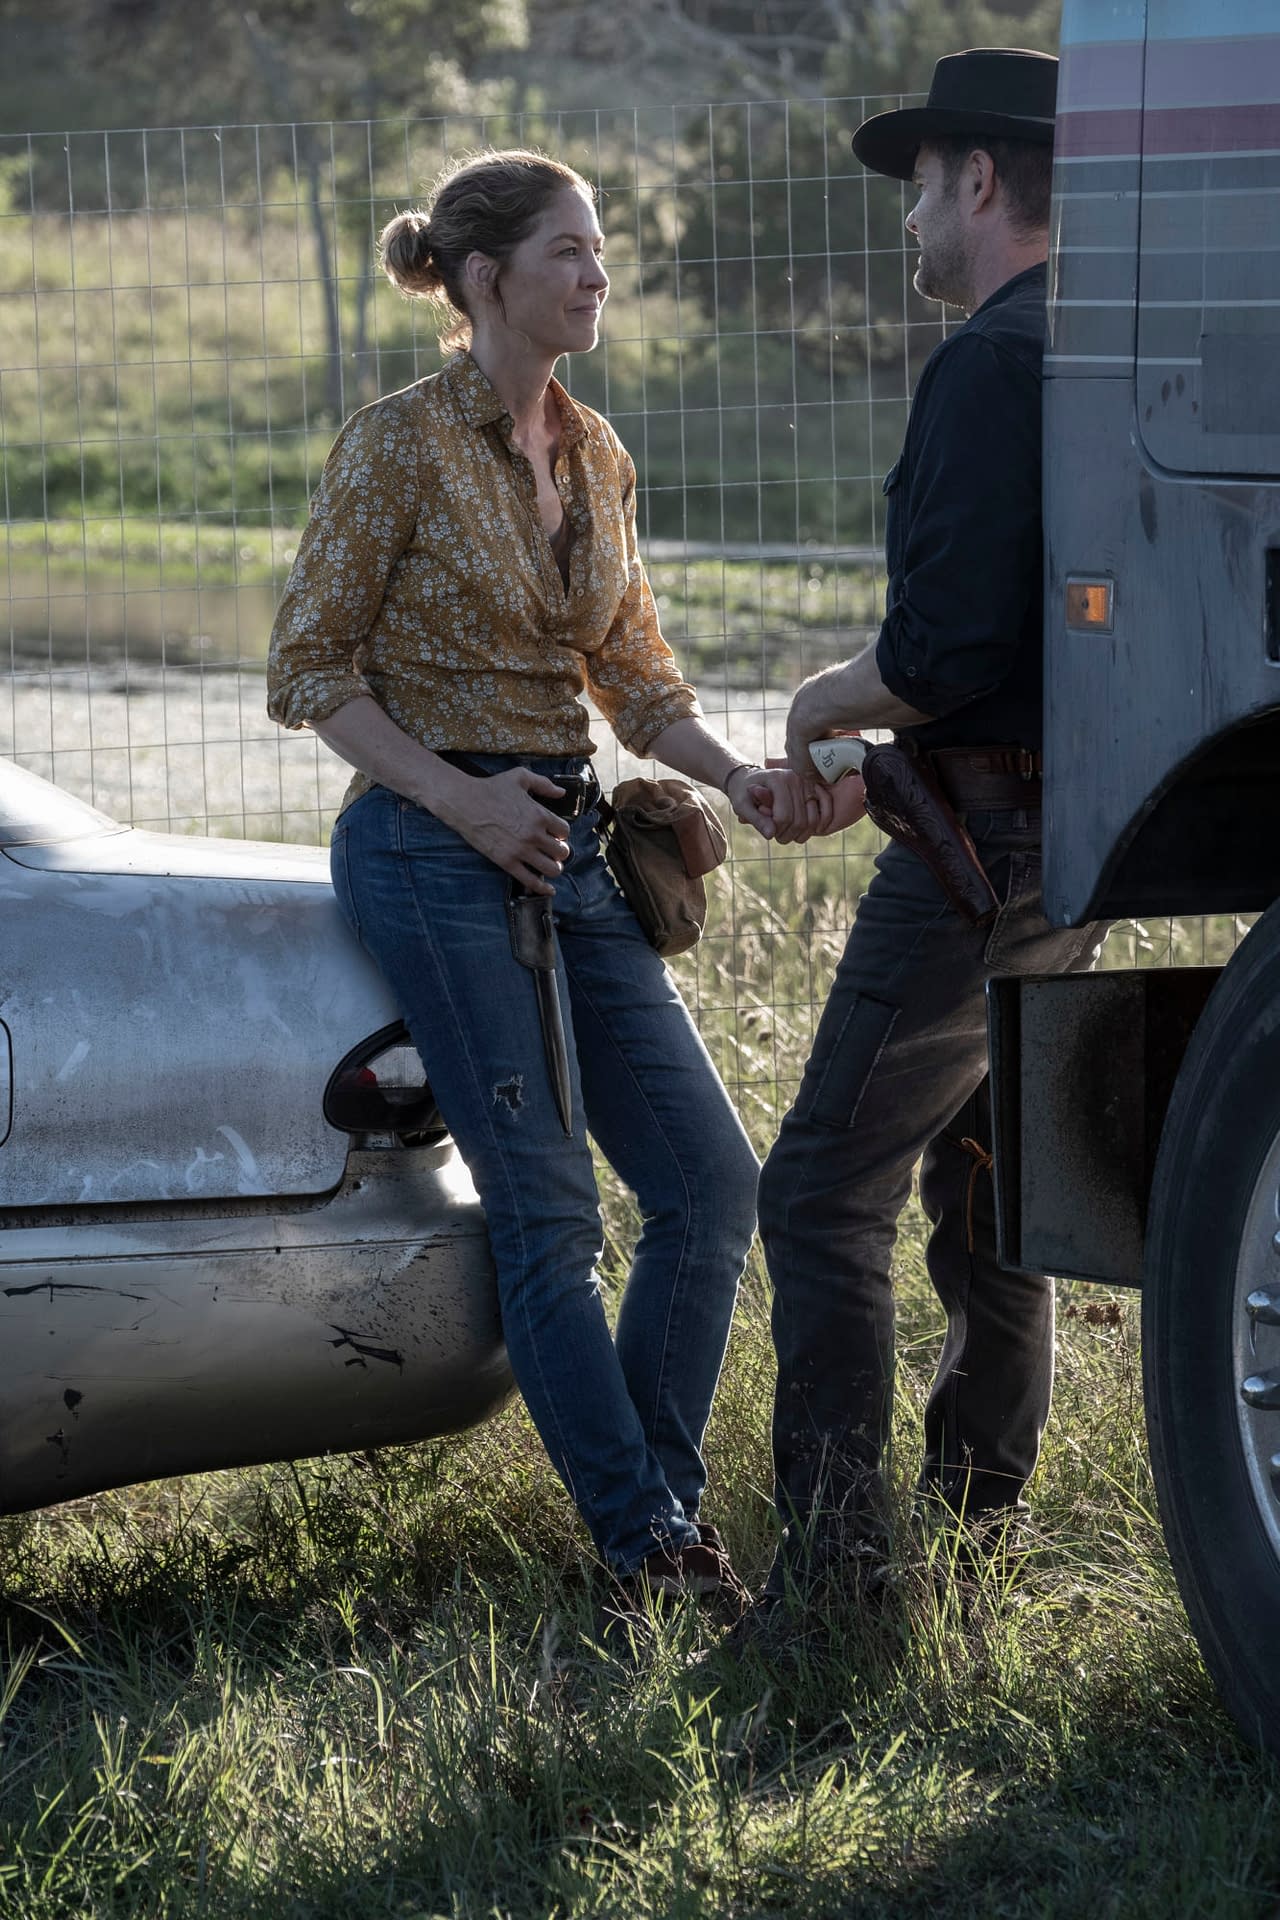 "Fear the Walking Dead" Season 5, Episode 15 "Channel 5": Will Ginny's Way Be Our Heroes' Only Way? [PREVIEW]